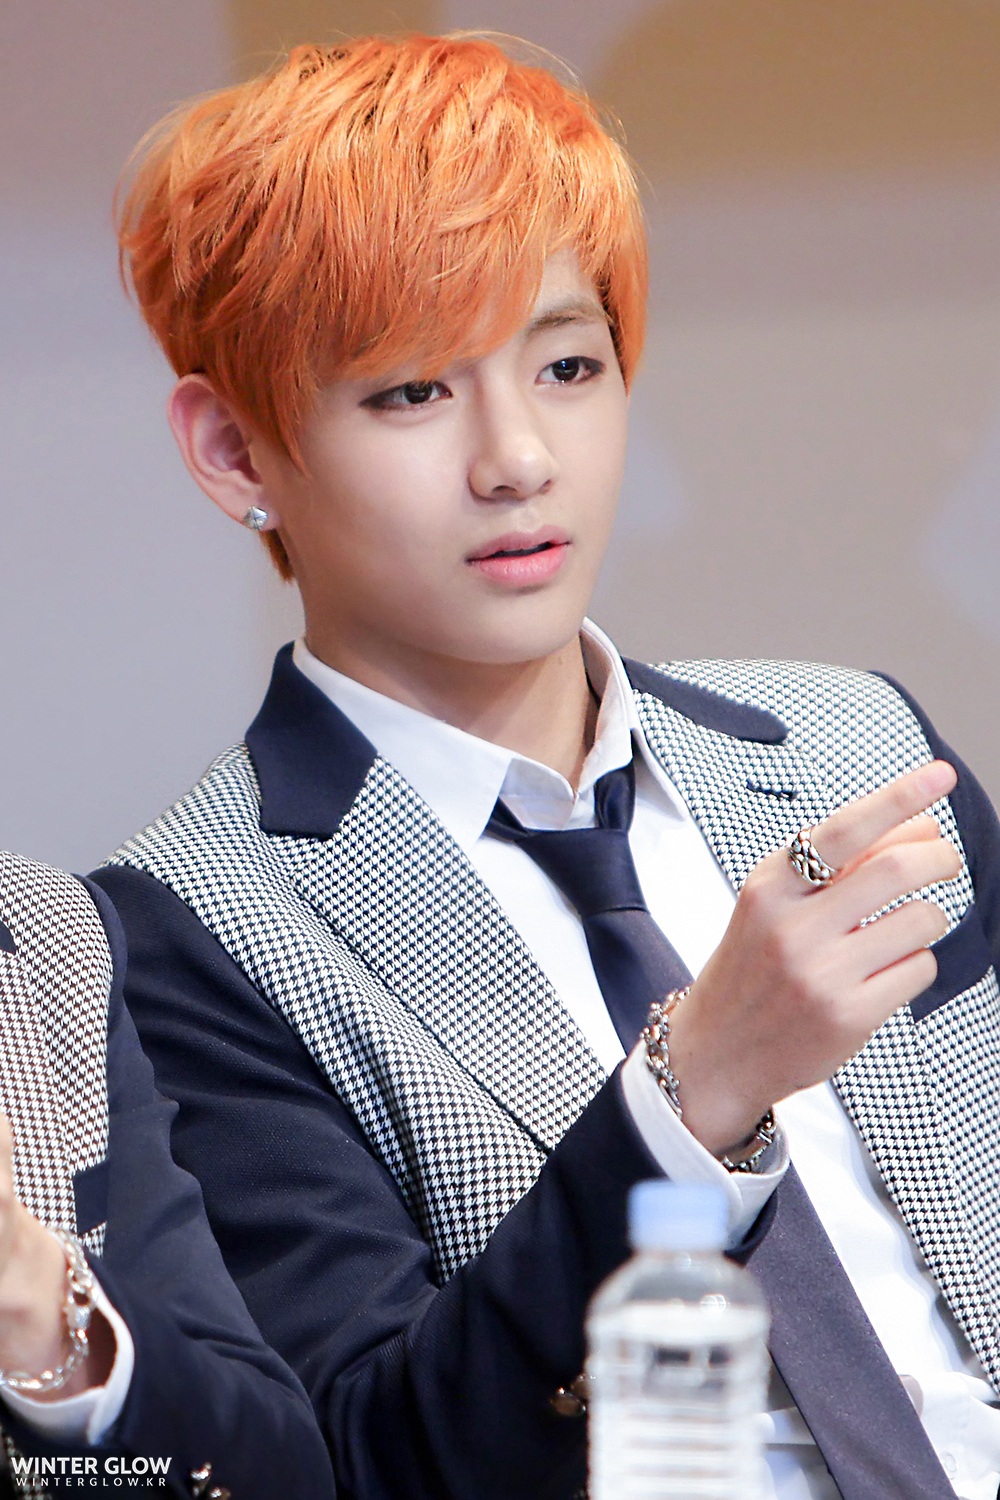 7 of BTS V's Most Outrageous Hair Colors - Koreaboo